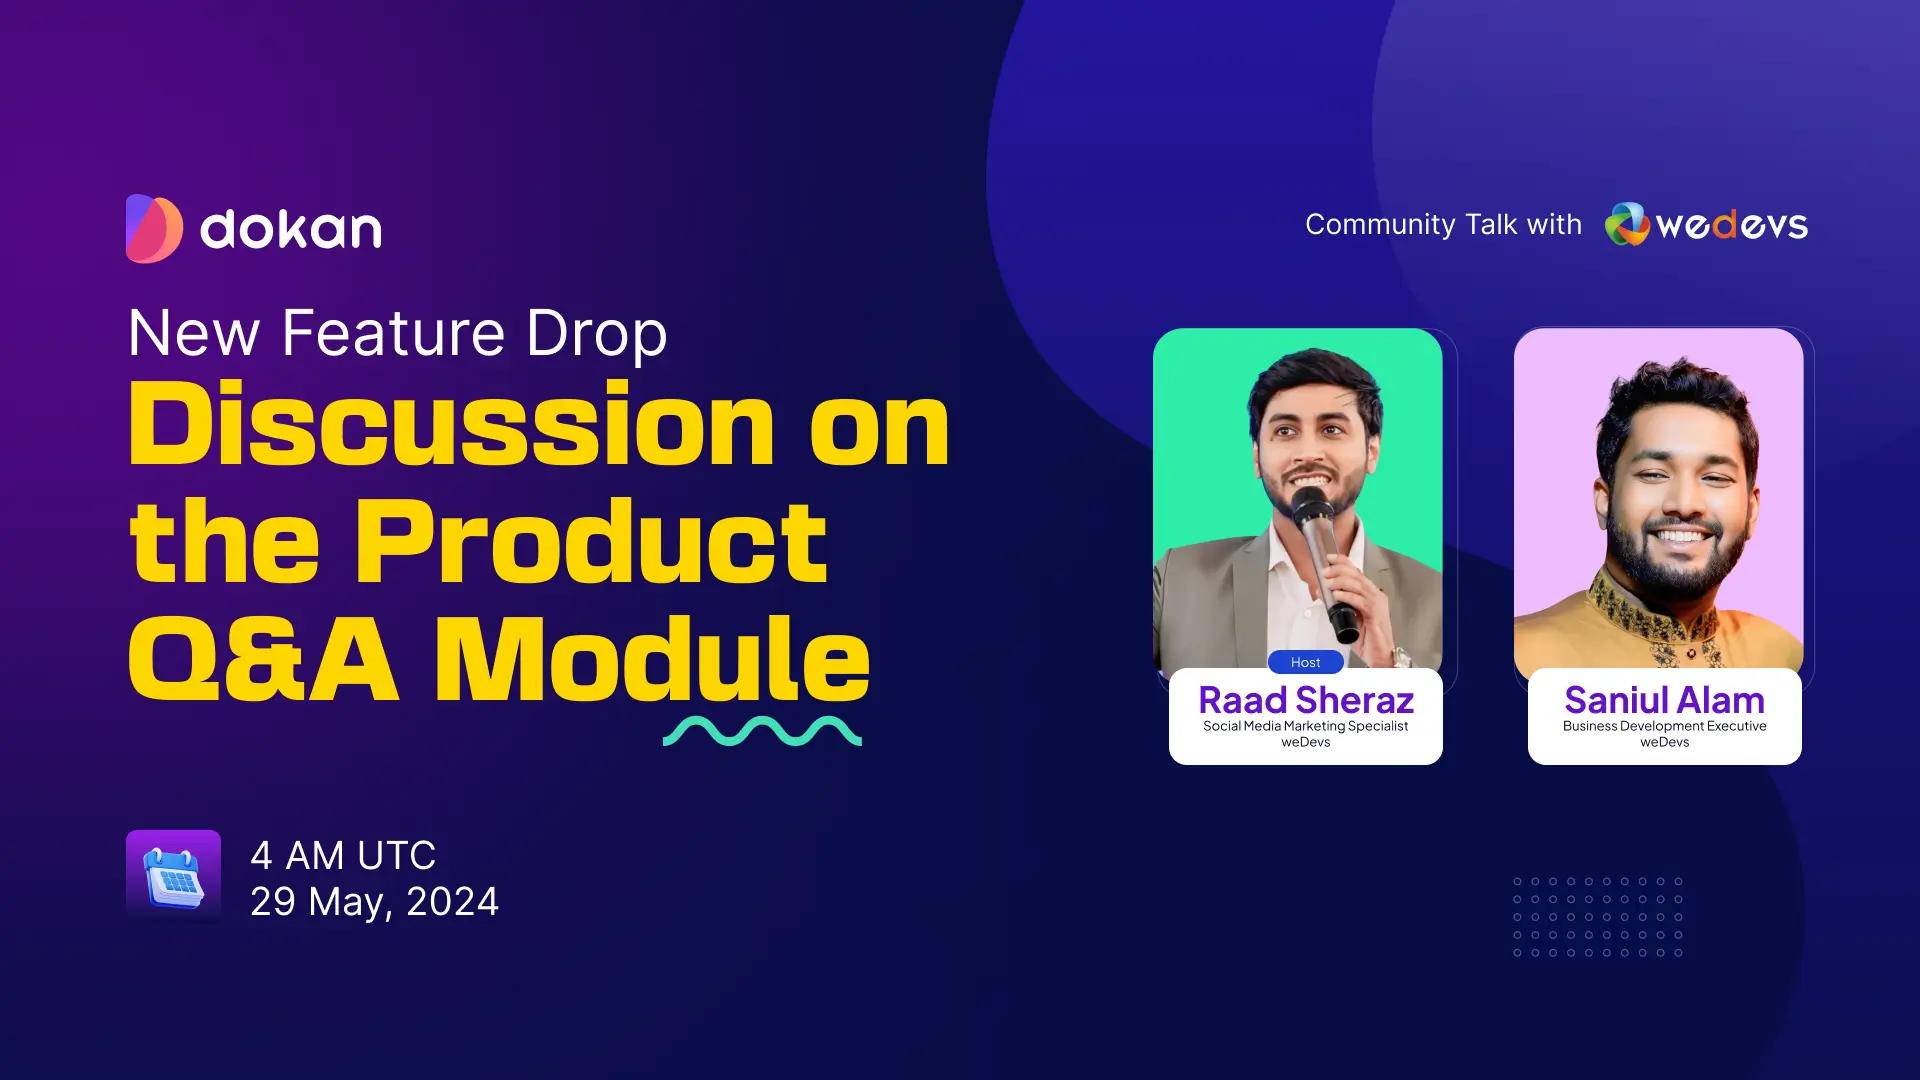 Discussion on Product Q&A Module